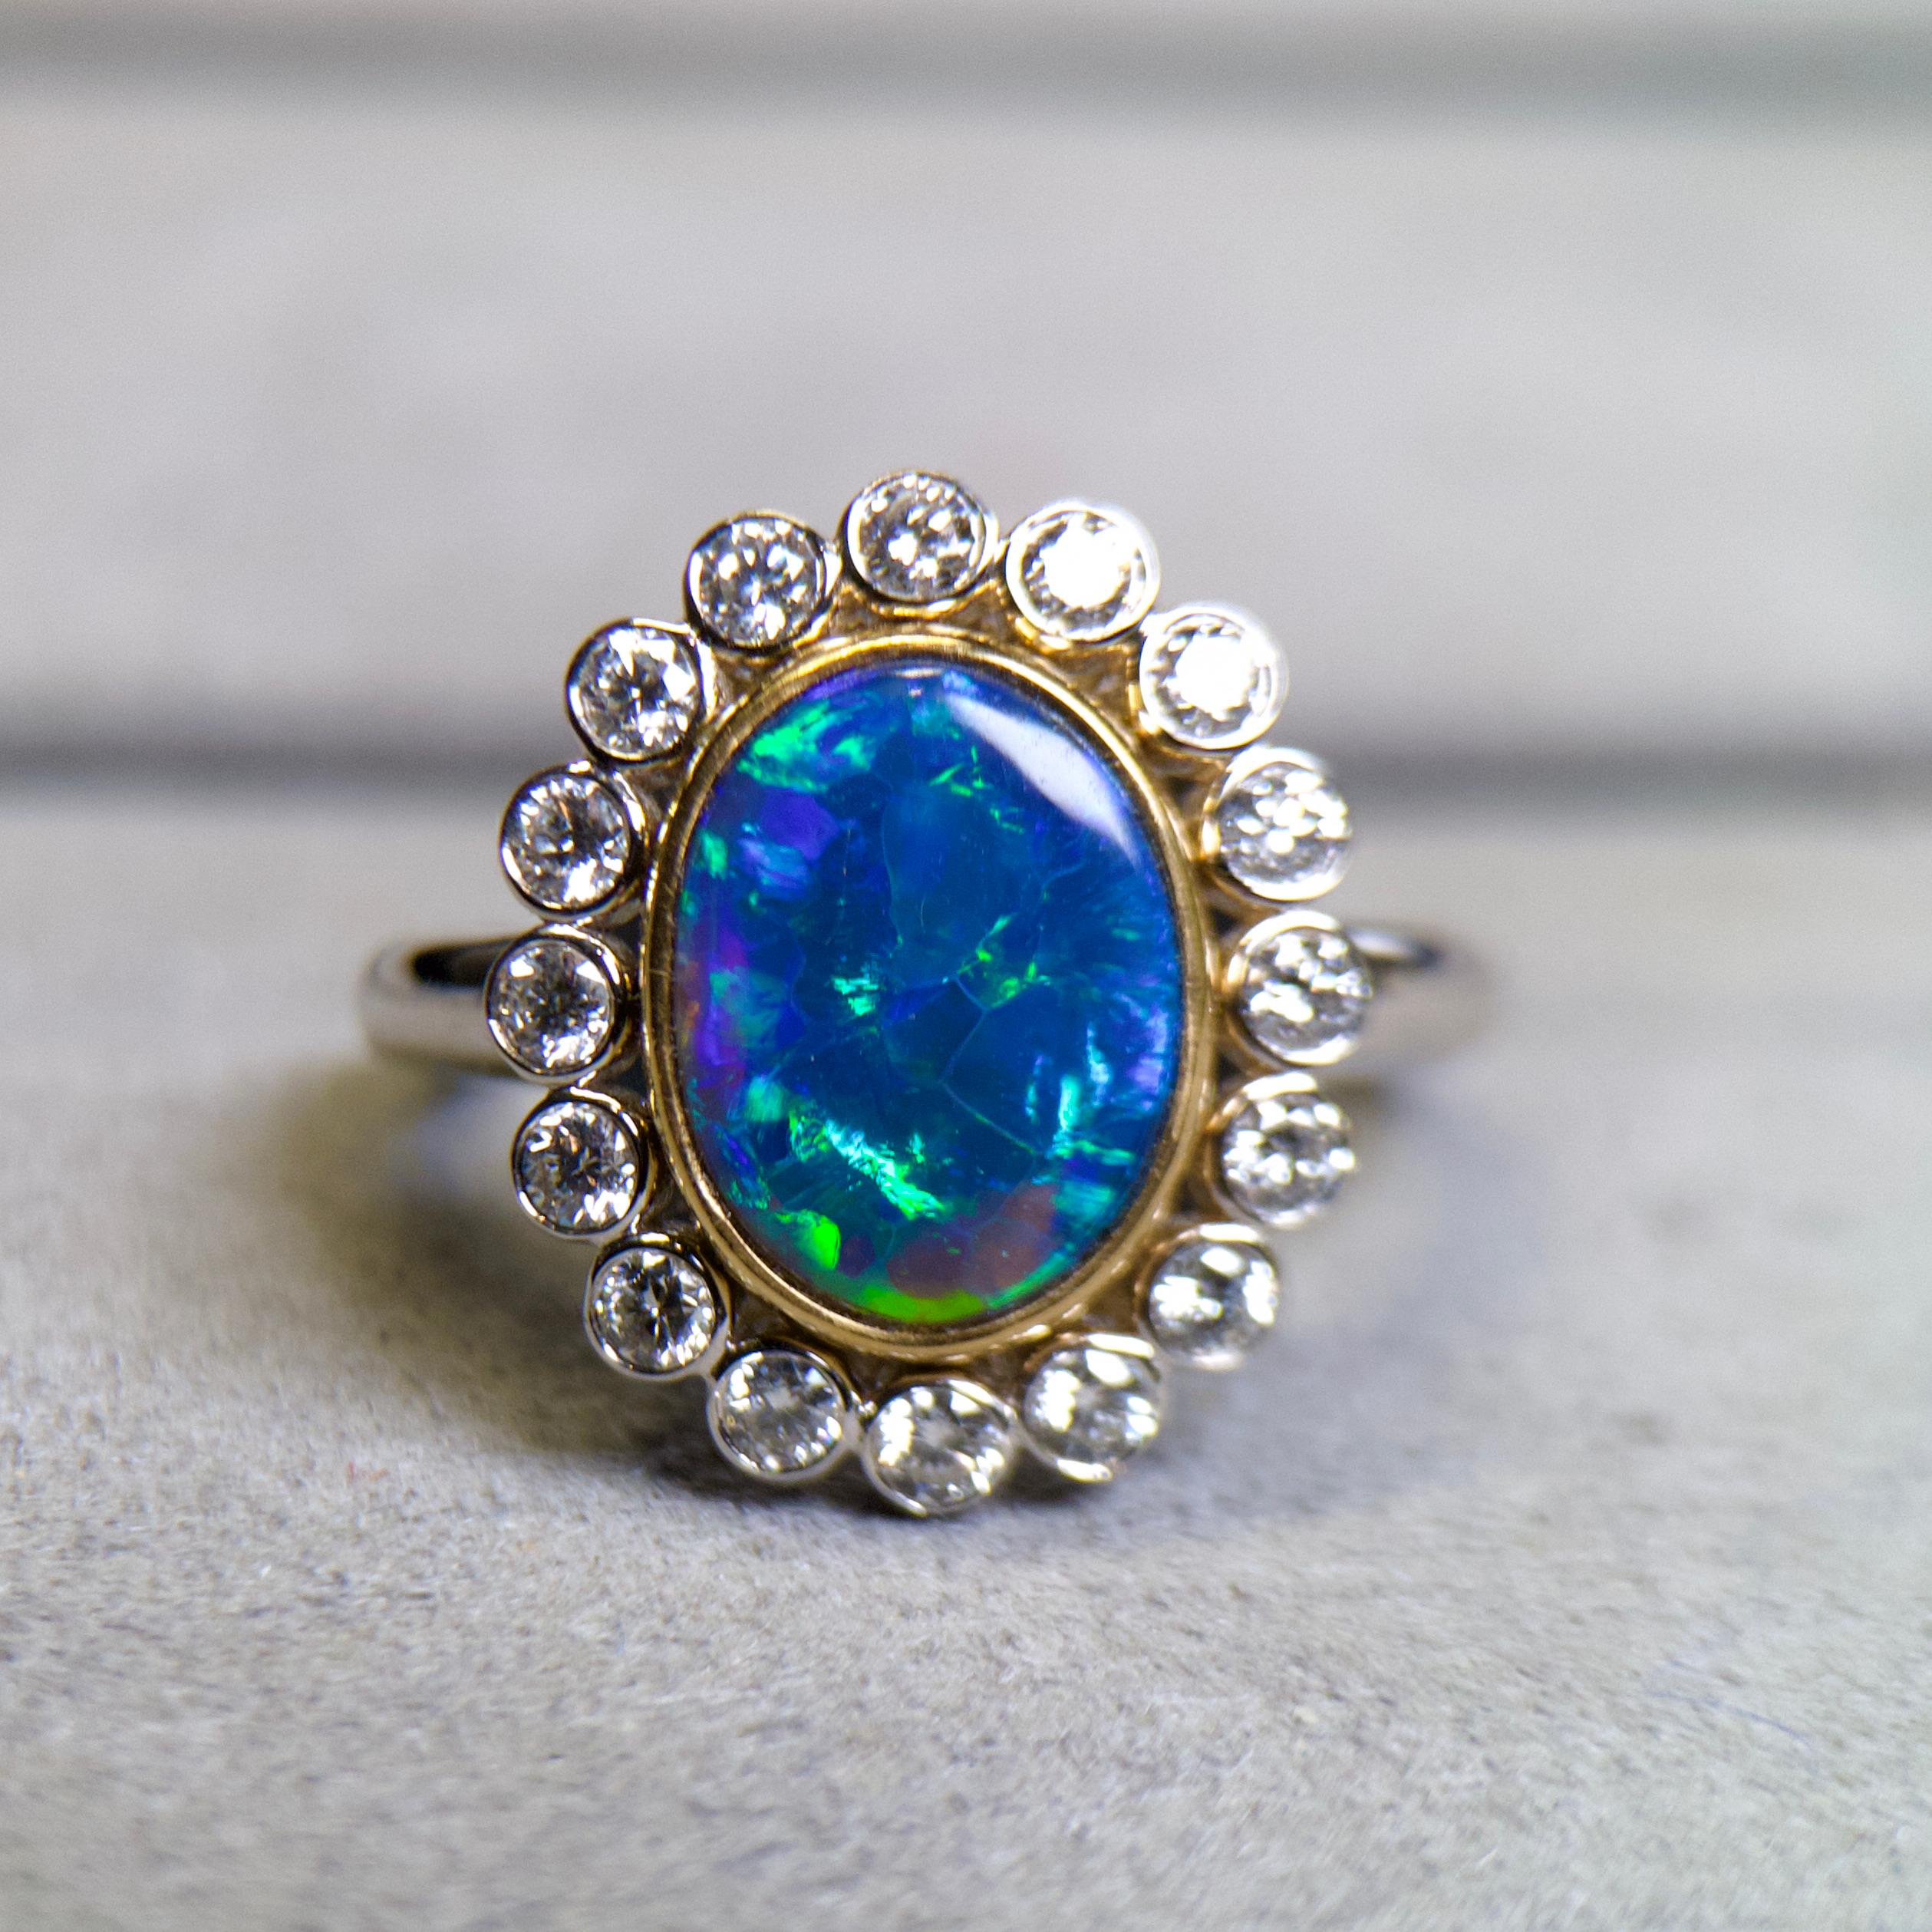 1.935ct Solid Black Opal and Diamond Ring in 18k Gold 

Main Opal Weight is 1.935ct
Total Natural Diamond Weight is 0.56ct, The Colour of the Diamond is Approximately E/F with VS Clarity 

US Ring size is 7